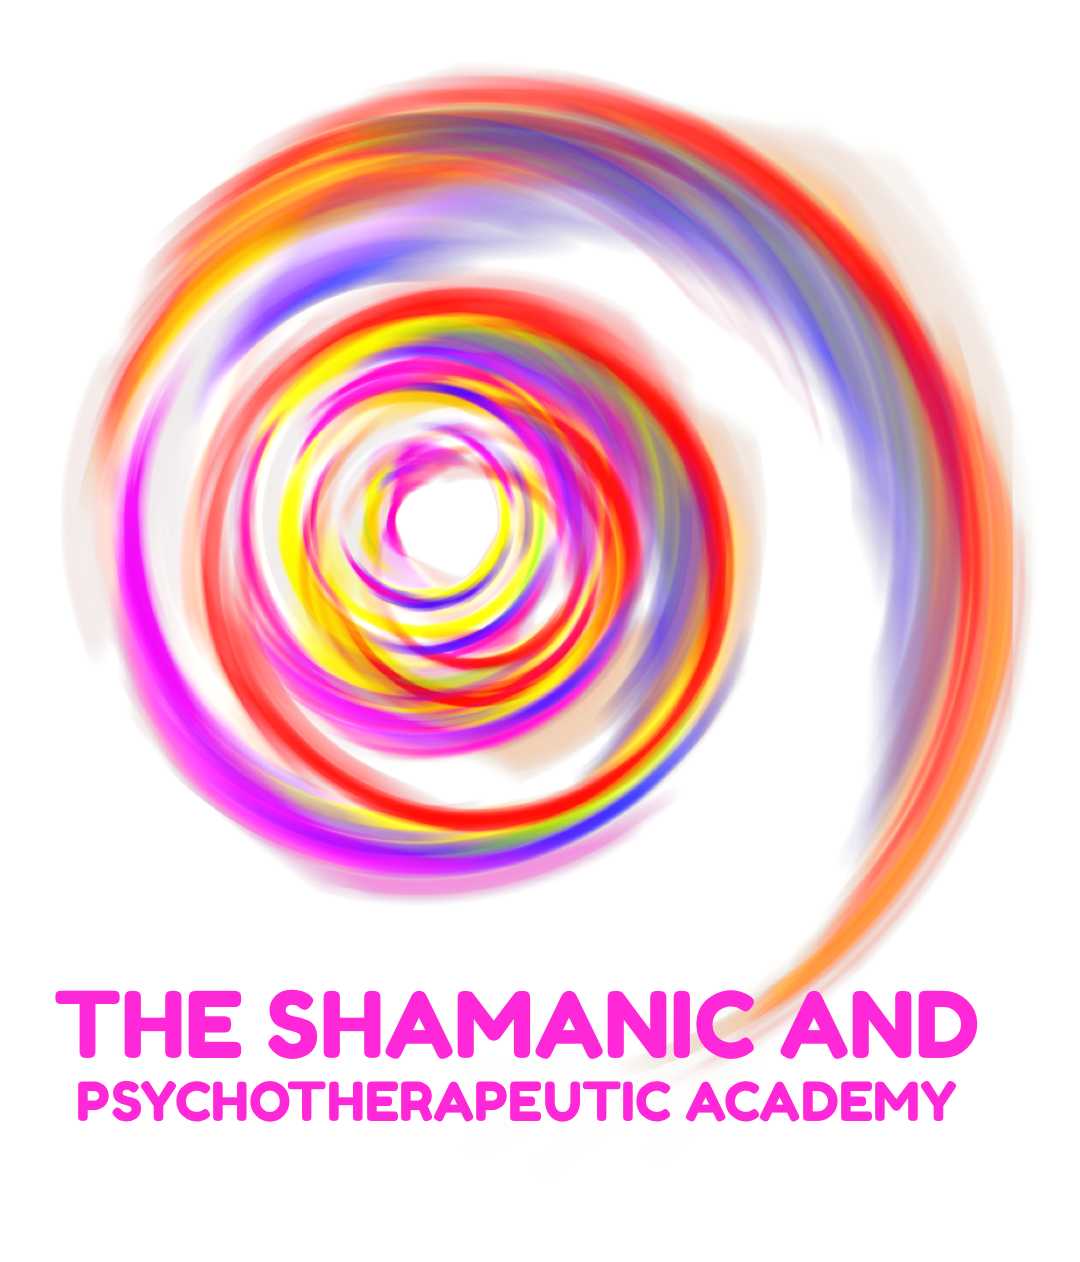 The Shamanic and Psychotherapeutic Academy